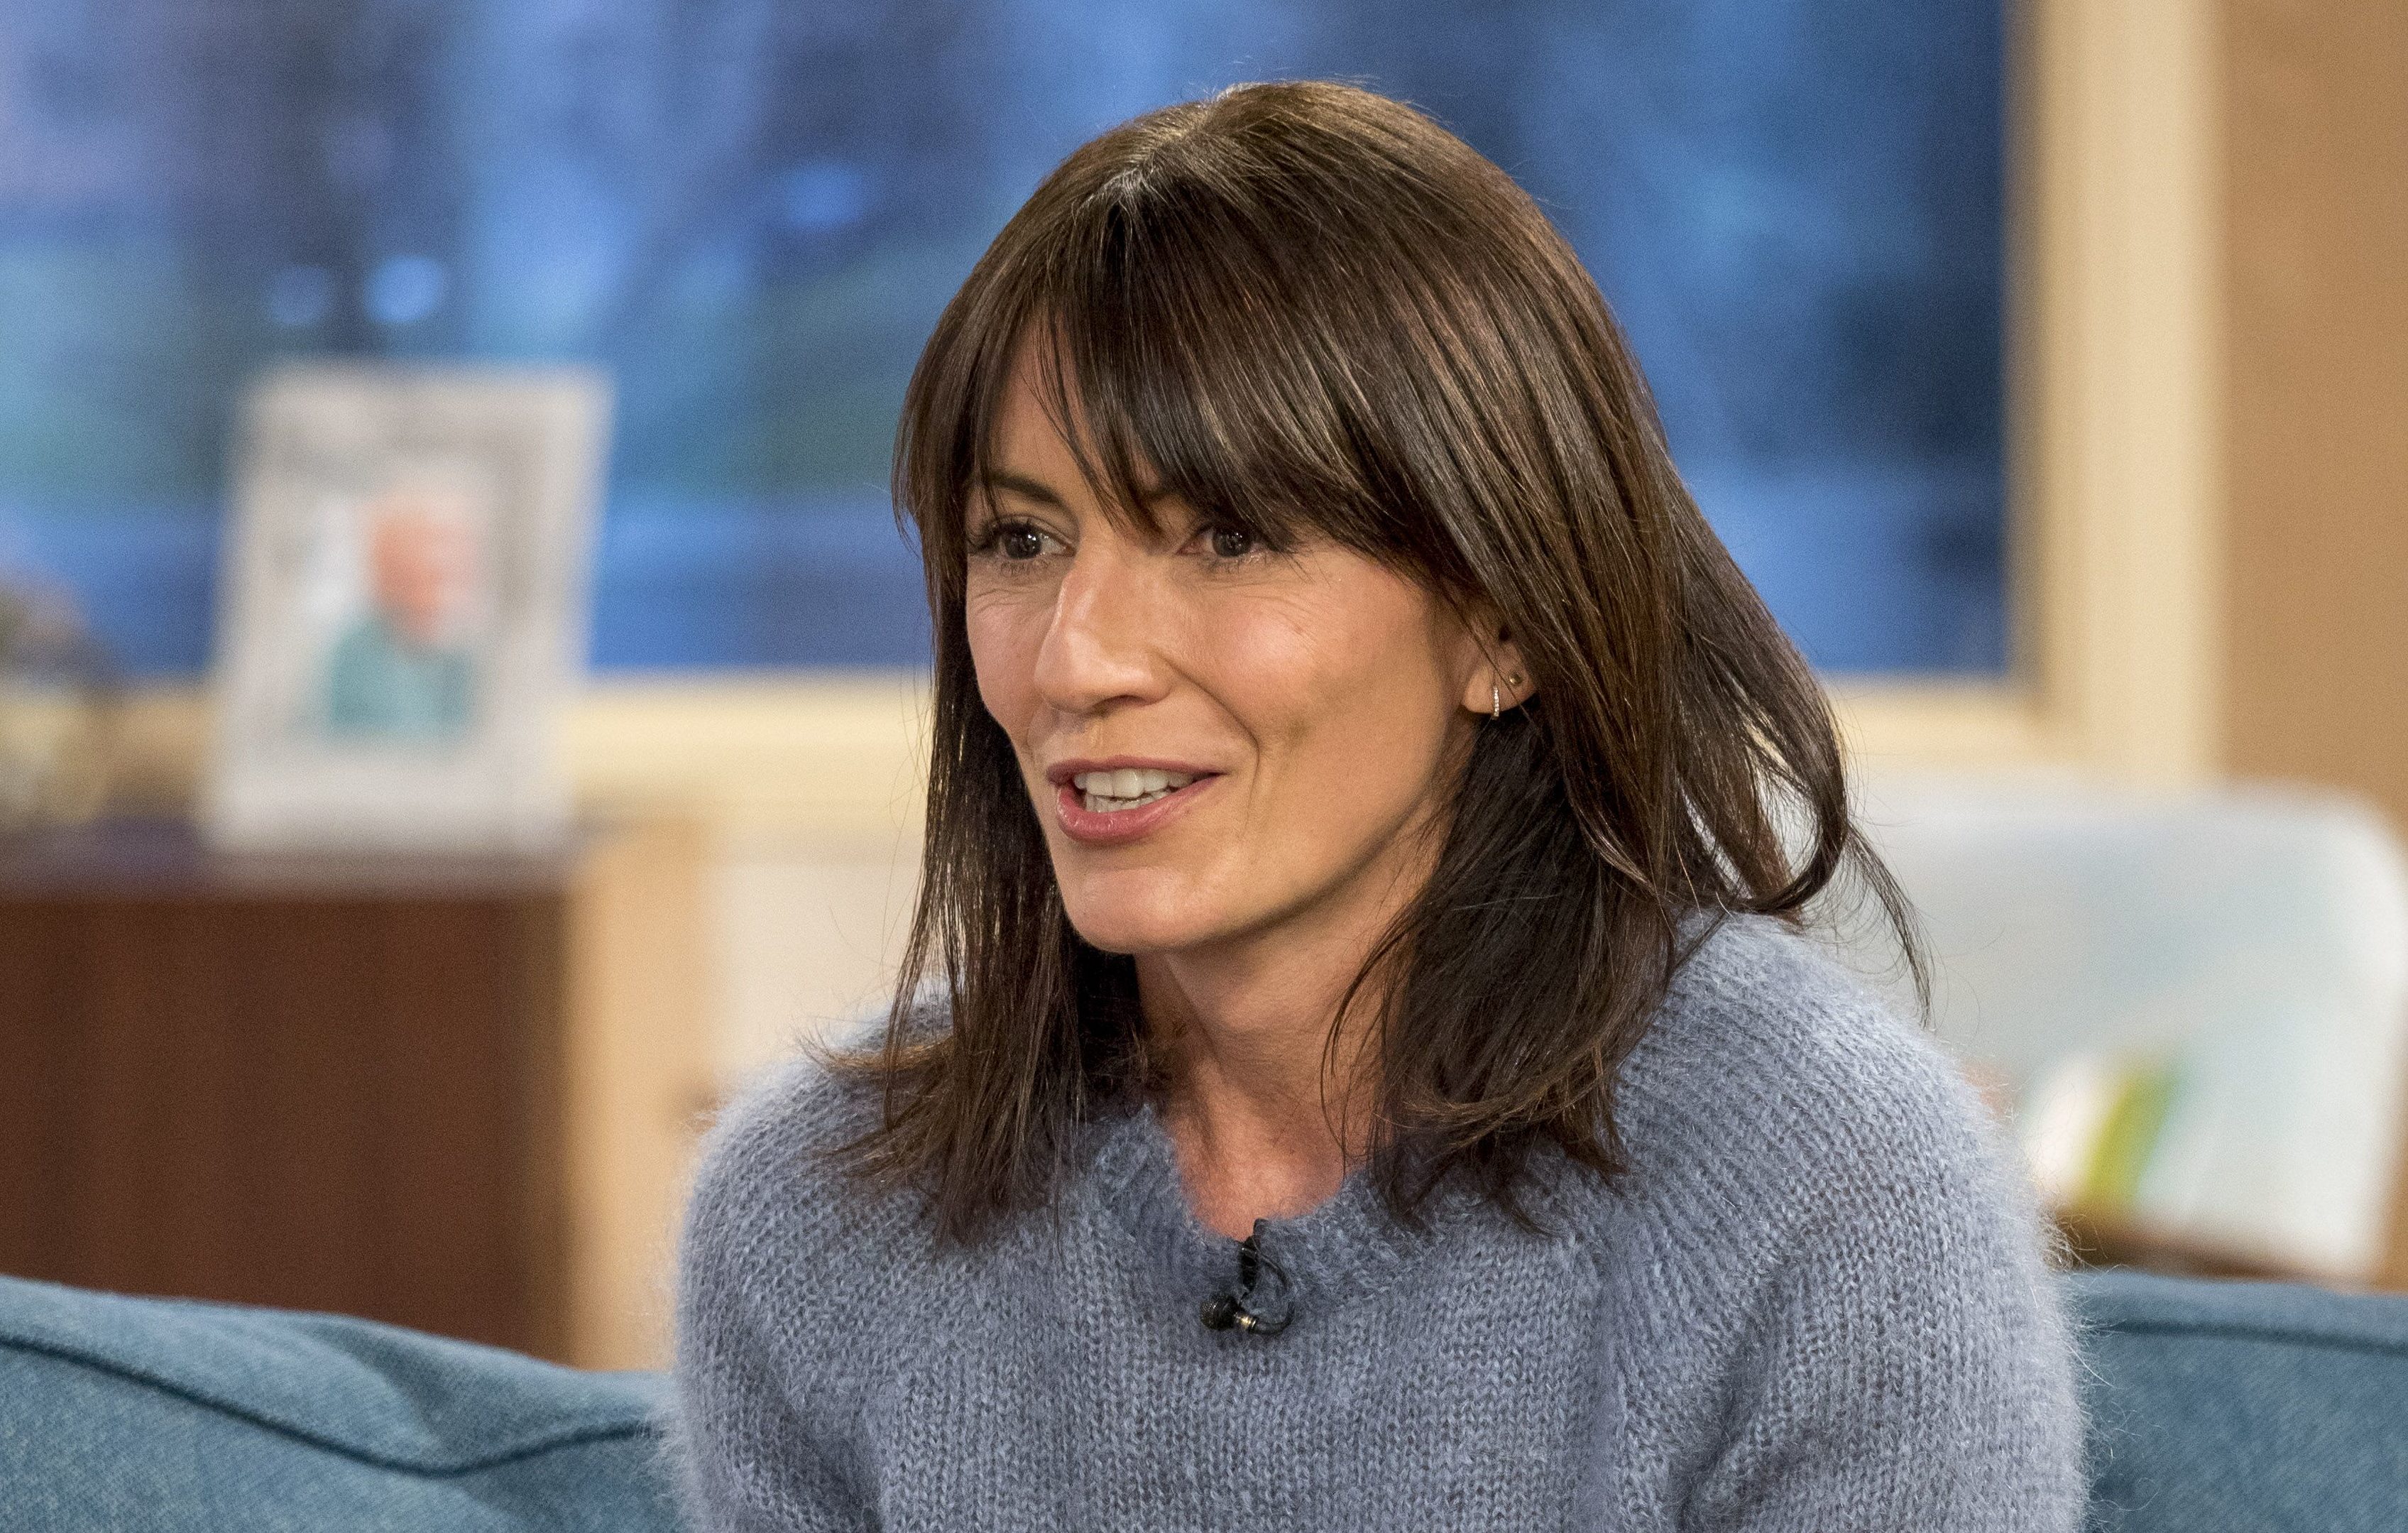 Condition your hair before shampoo is applied to get smooth and shiny locks like Davina McCall